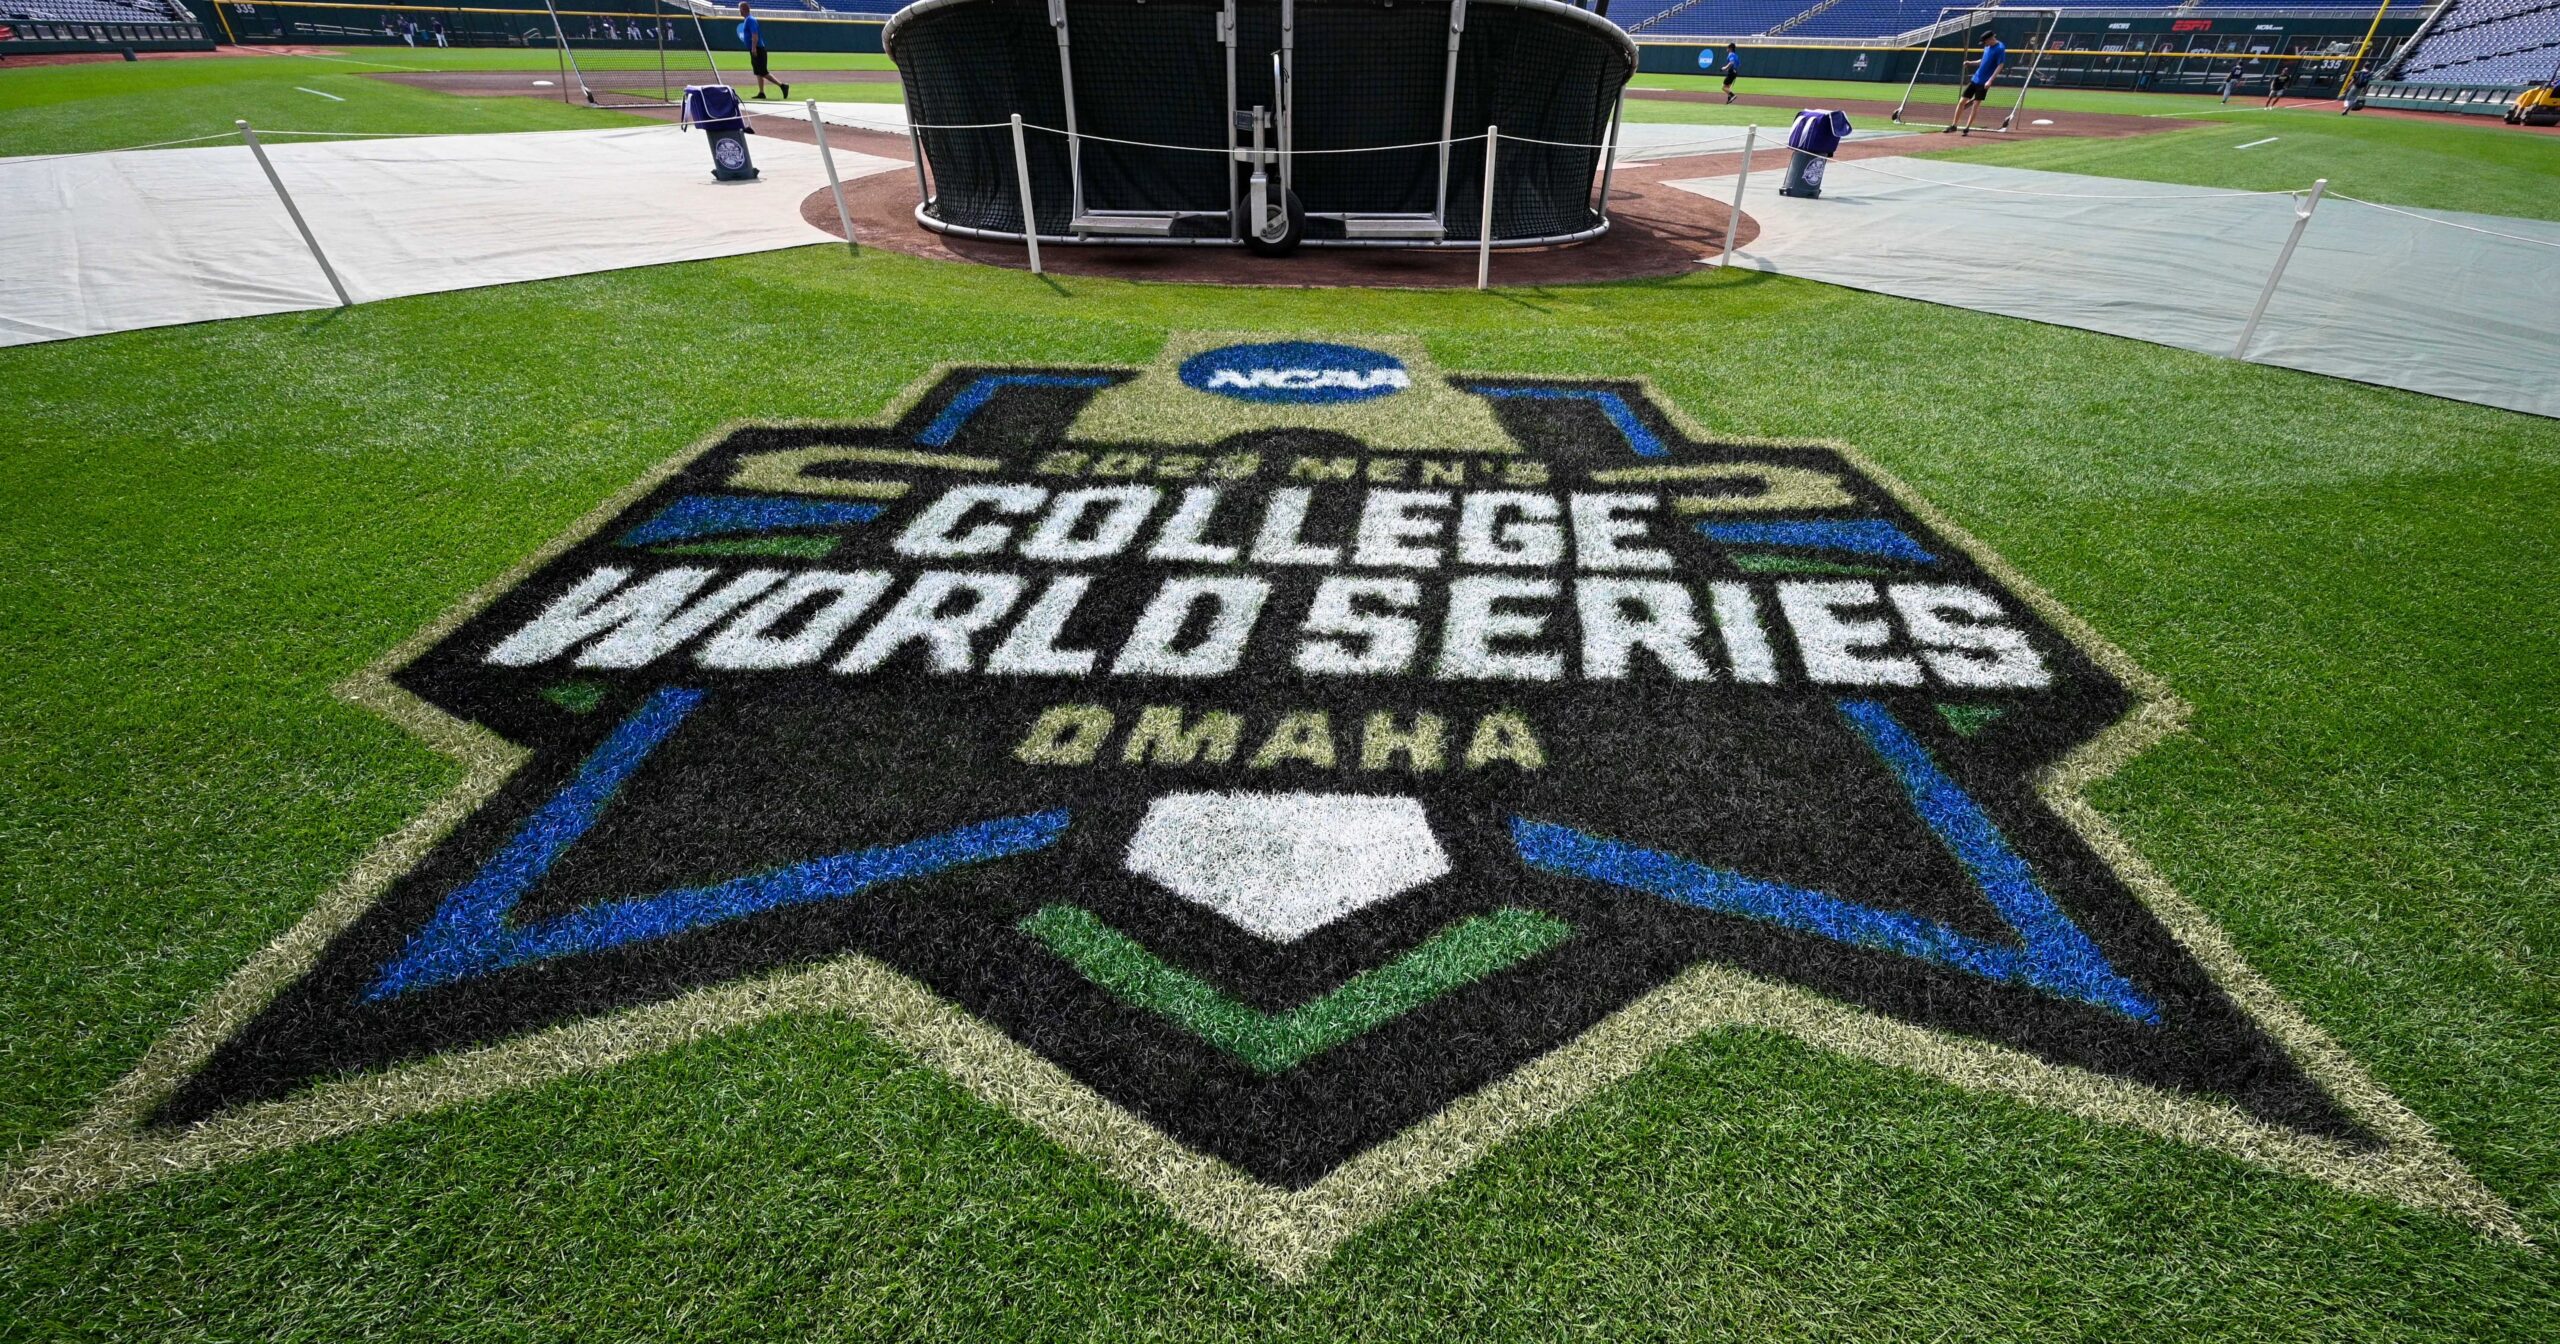 How to Watch Tennessee vs. Stanford in the College World Series